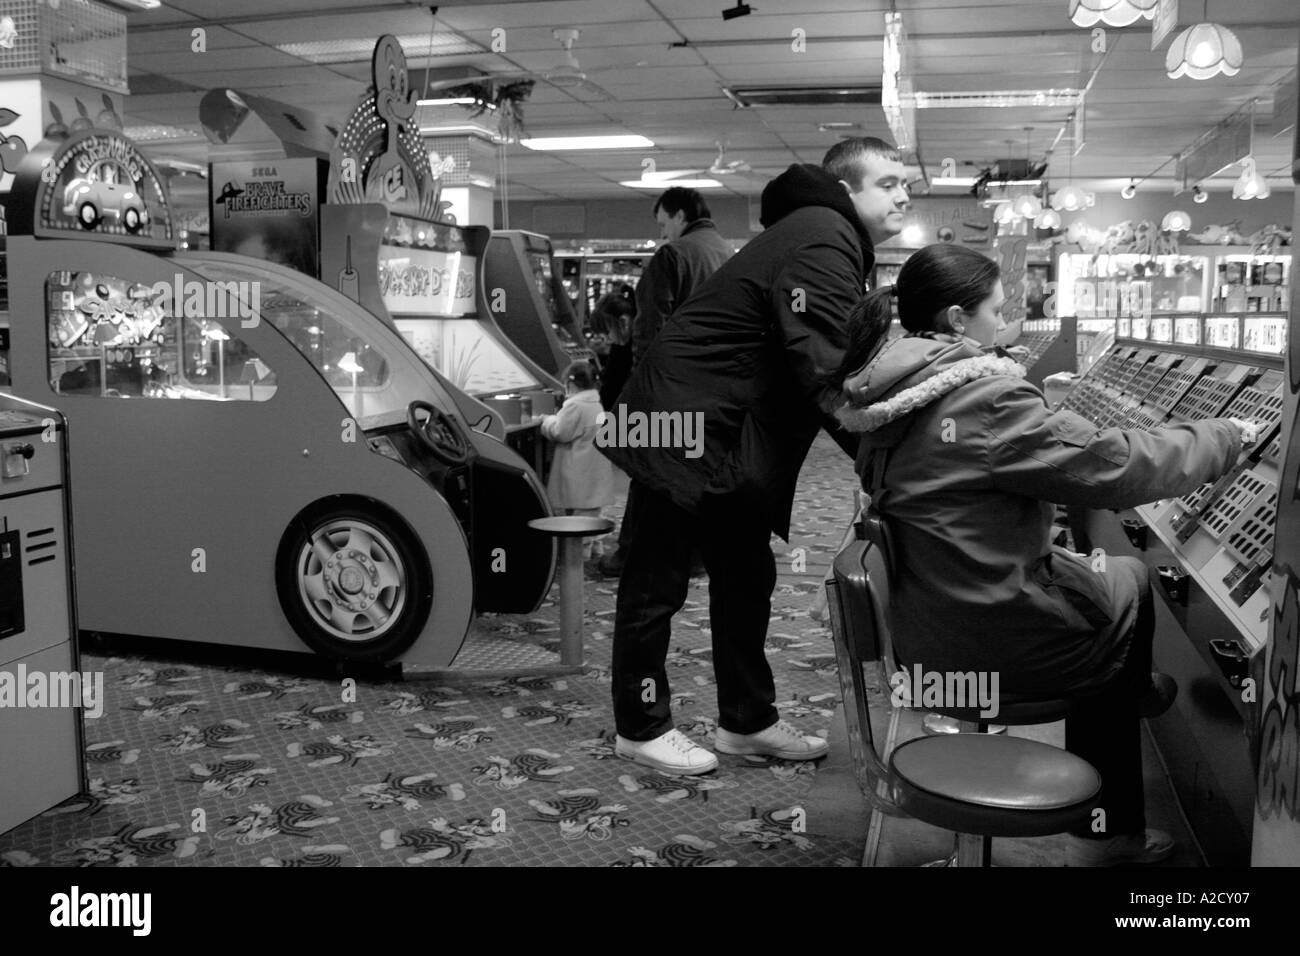 black and white image off an arcade with people playing the machines Stock Photo